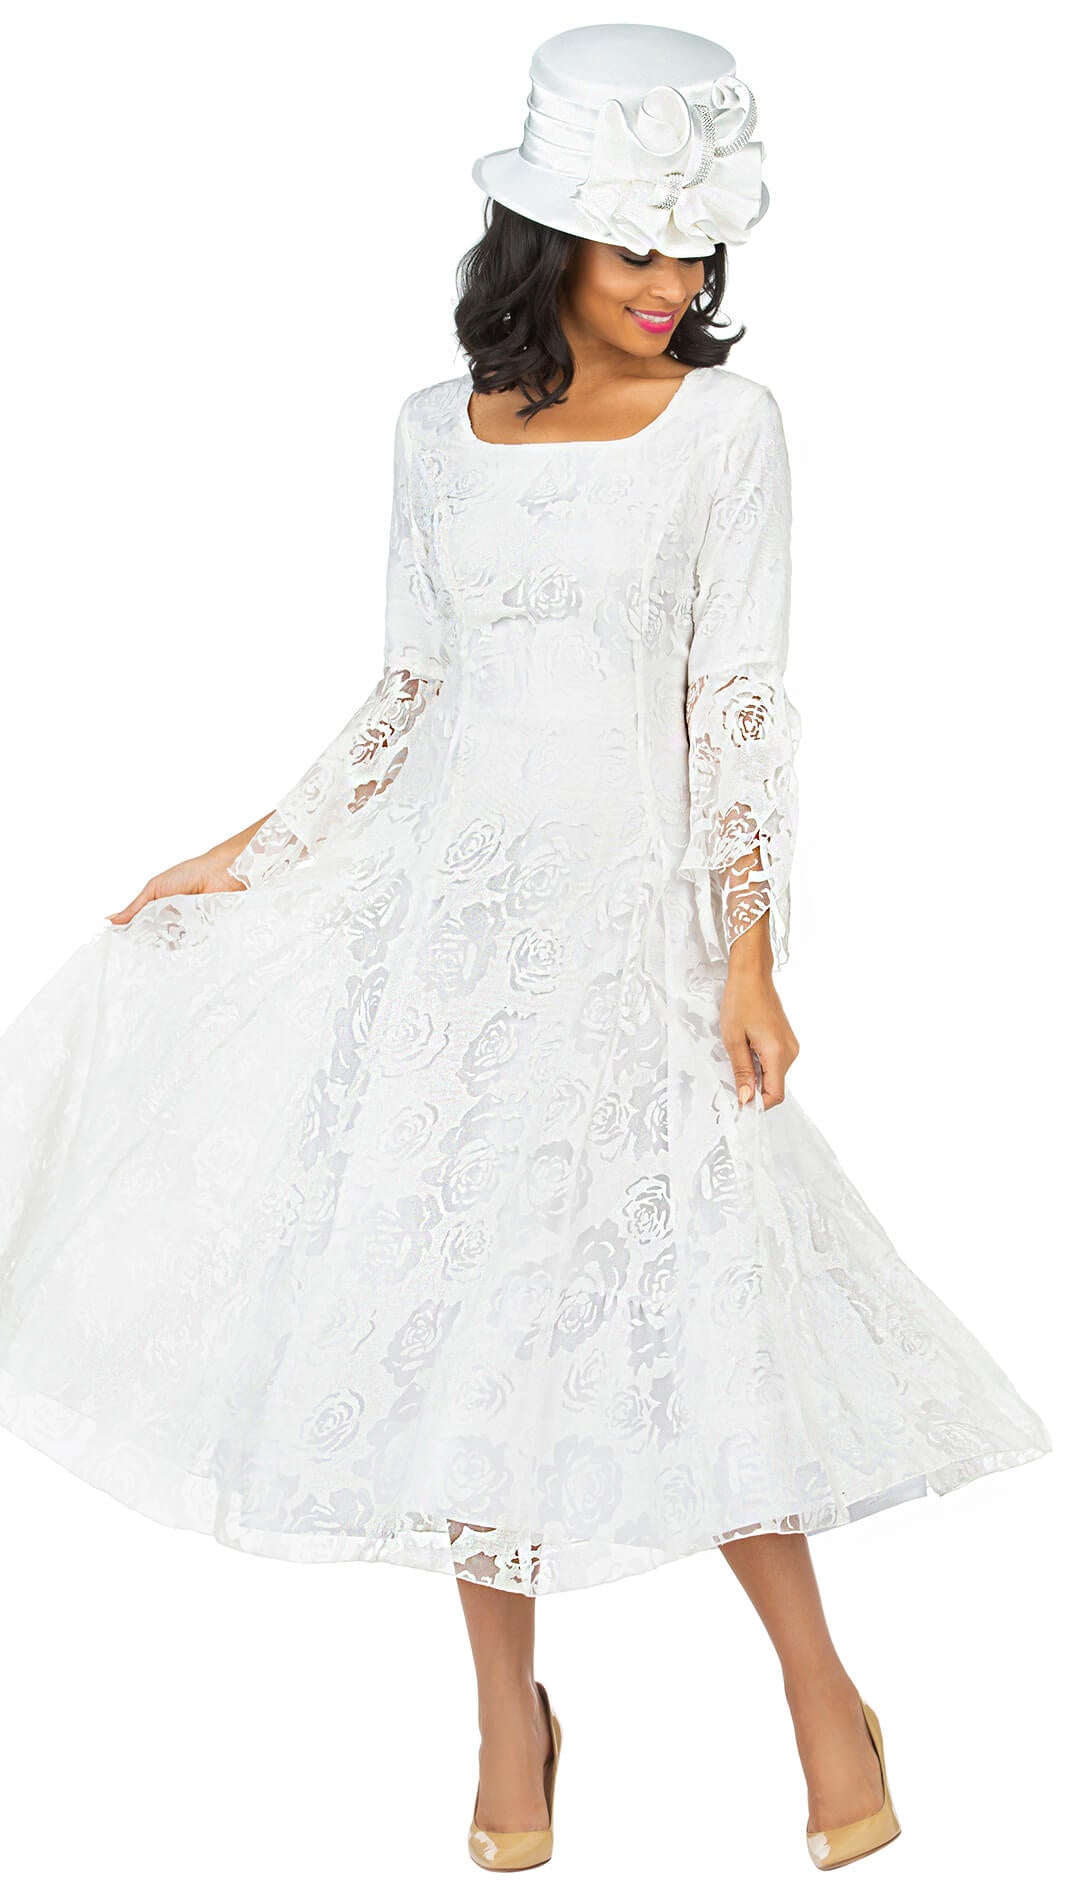 Giovanna Church Dress D1584C-Off-White - Church Suits For Less